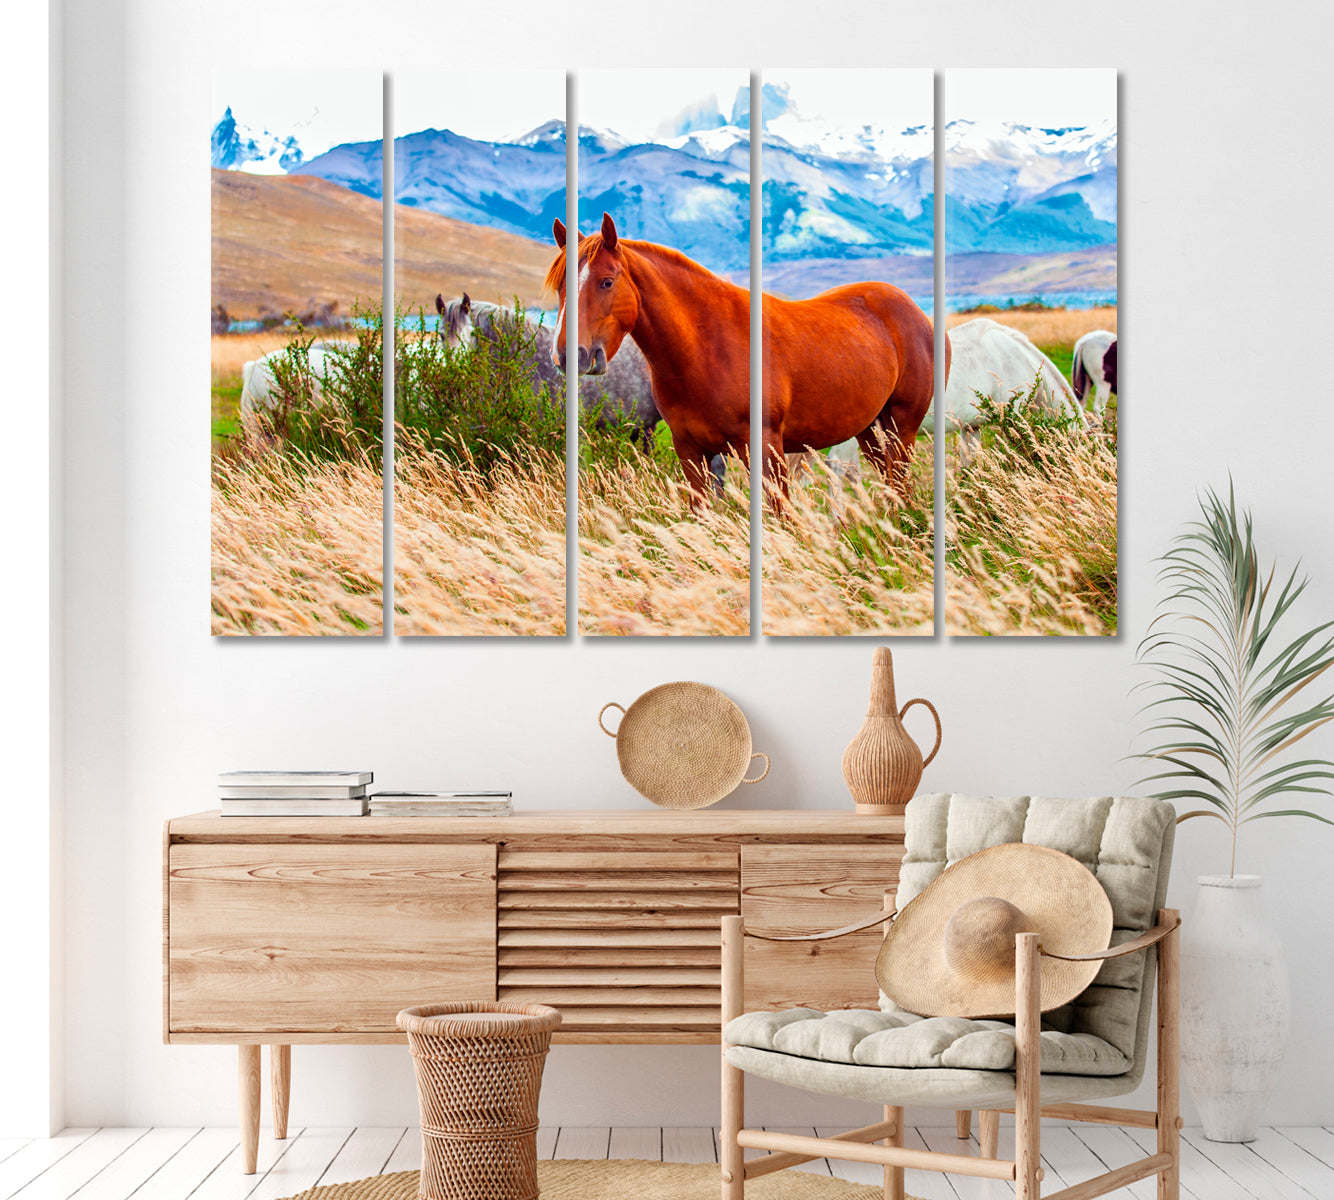 Horses in Torres del Paine Park Chile Canvas Print ArtLexy 5 Panels 36"x24" inches 